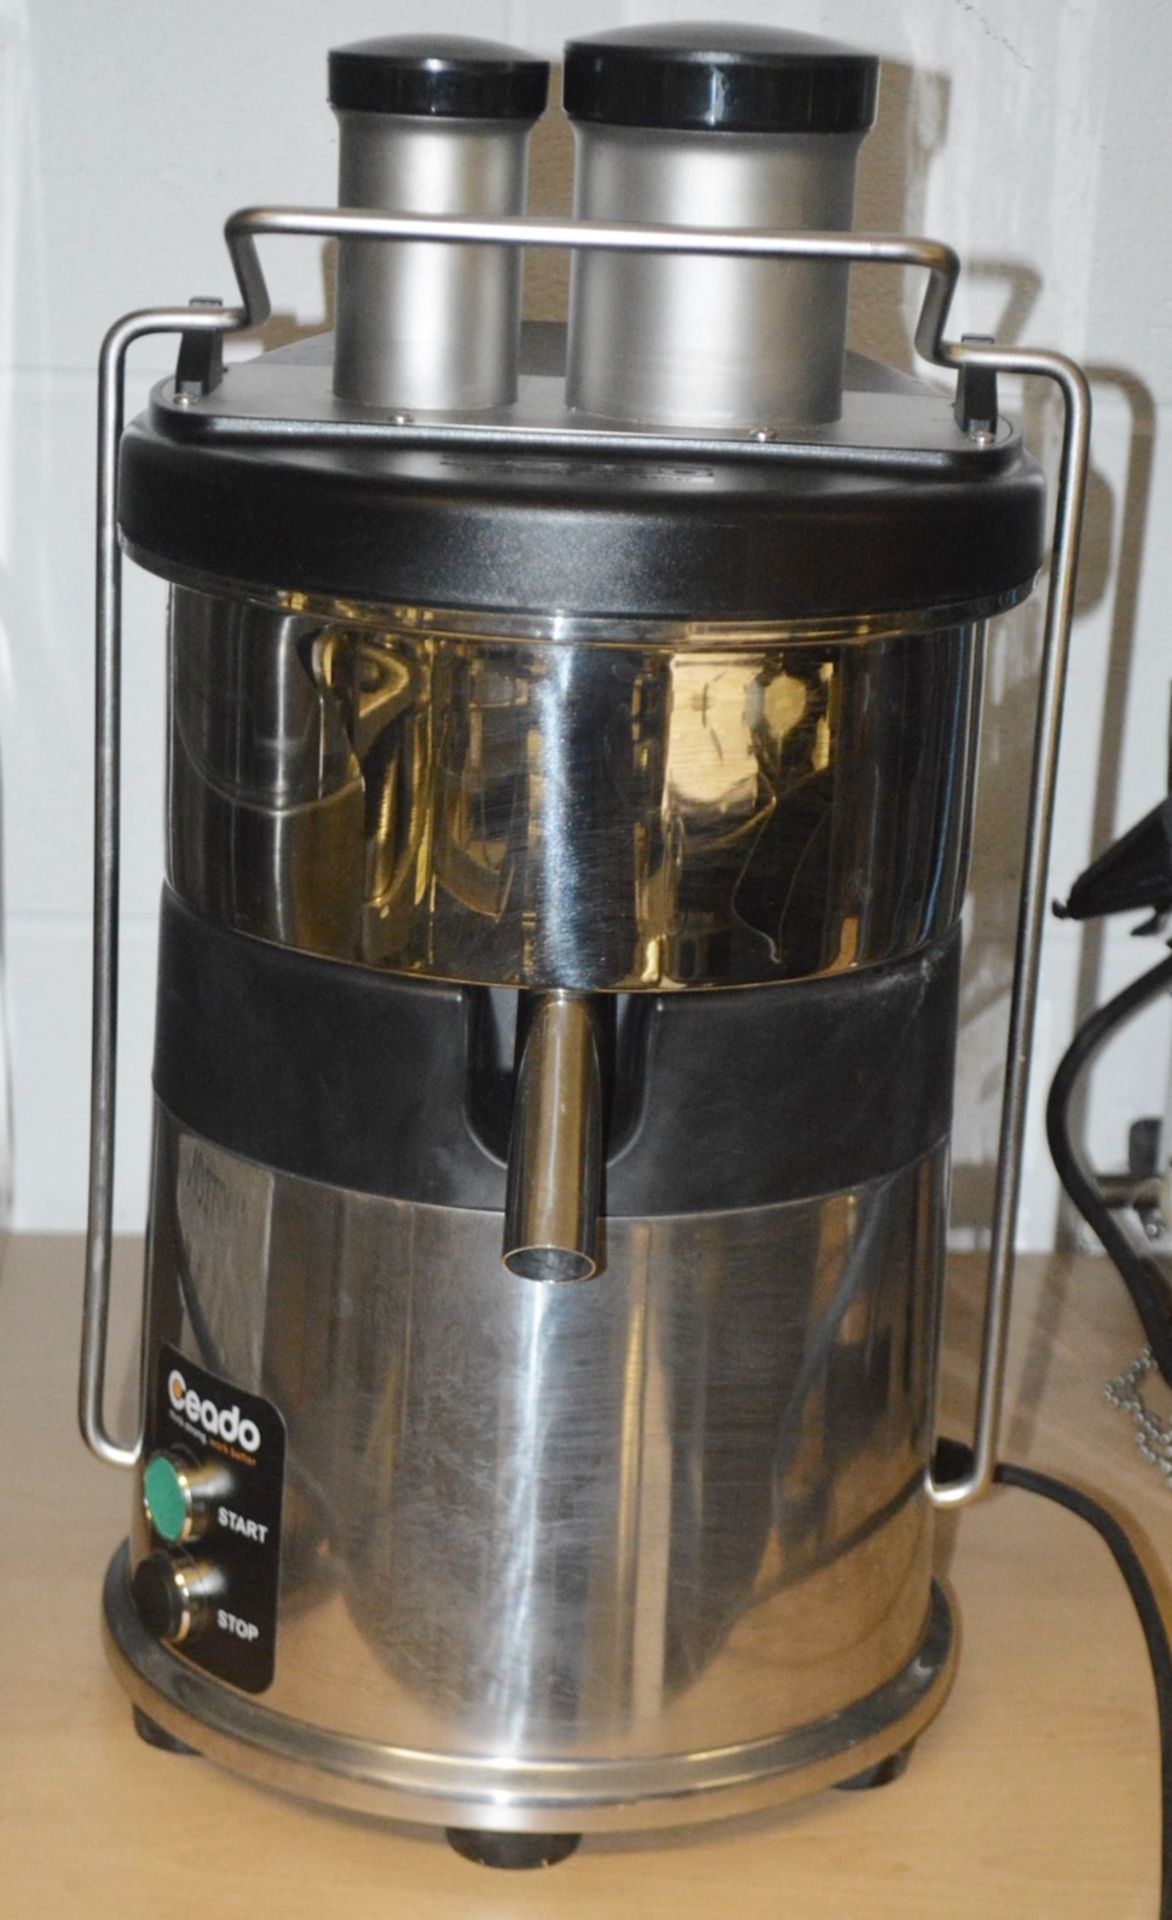 1 x Ceado ES700 Professional High Powered Centrifugal Juice Extractor - Original RRP £2,200 - Image 5 of 7